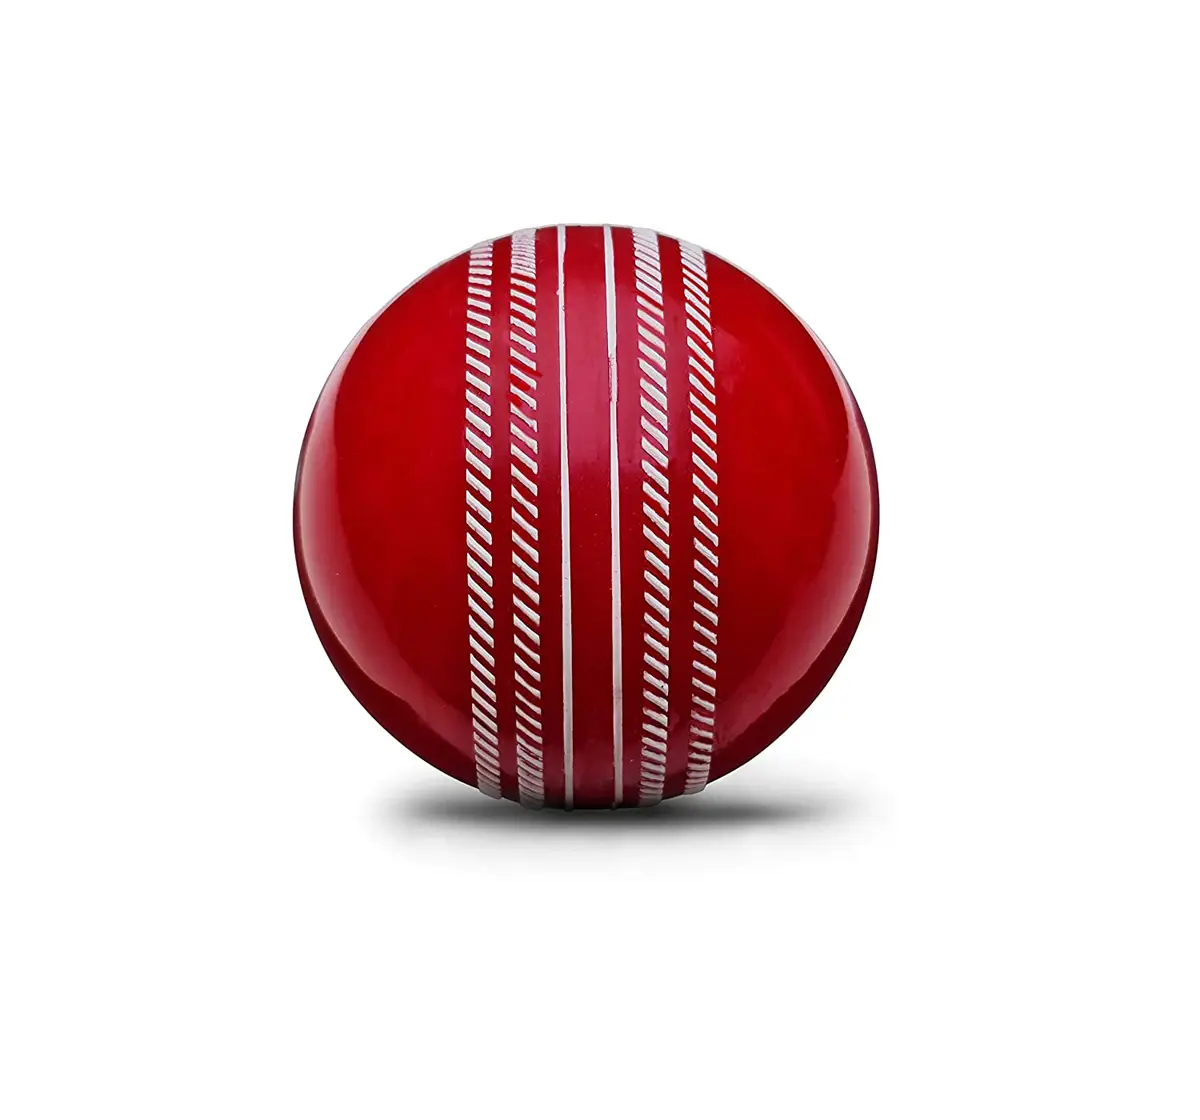 Jaspo Cricket Ball For Practice, Training , Matches For All Age Group T20 Soft Ball 1 Pc , Red Pvc , Standard Size Red 6Y+